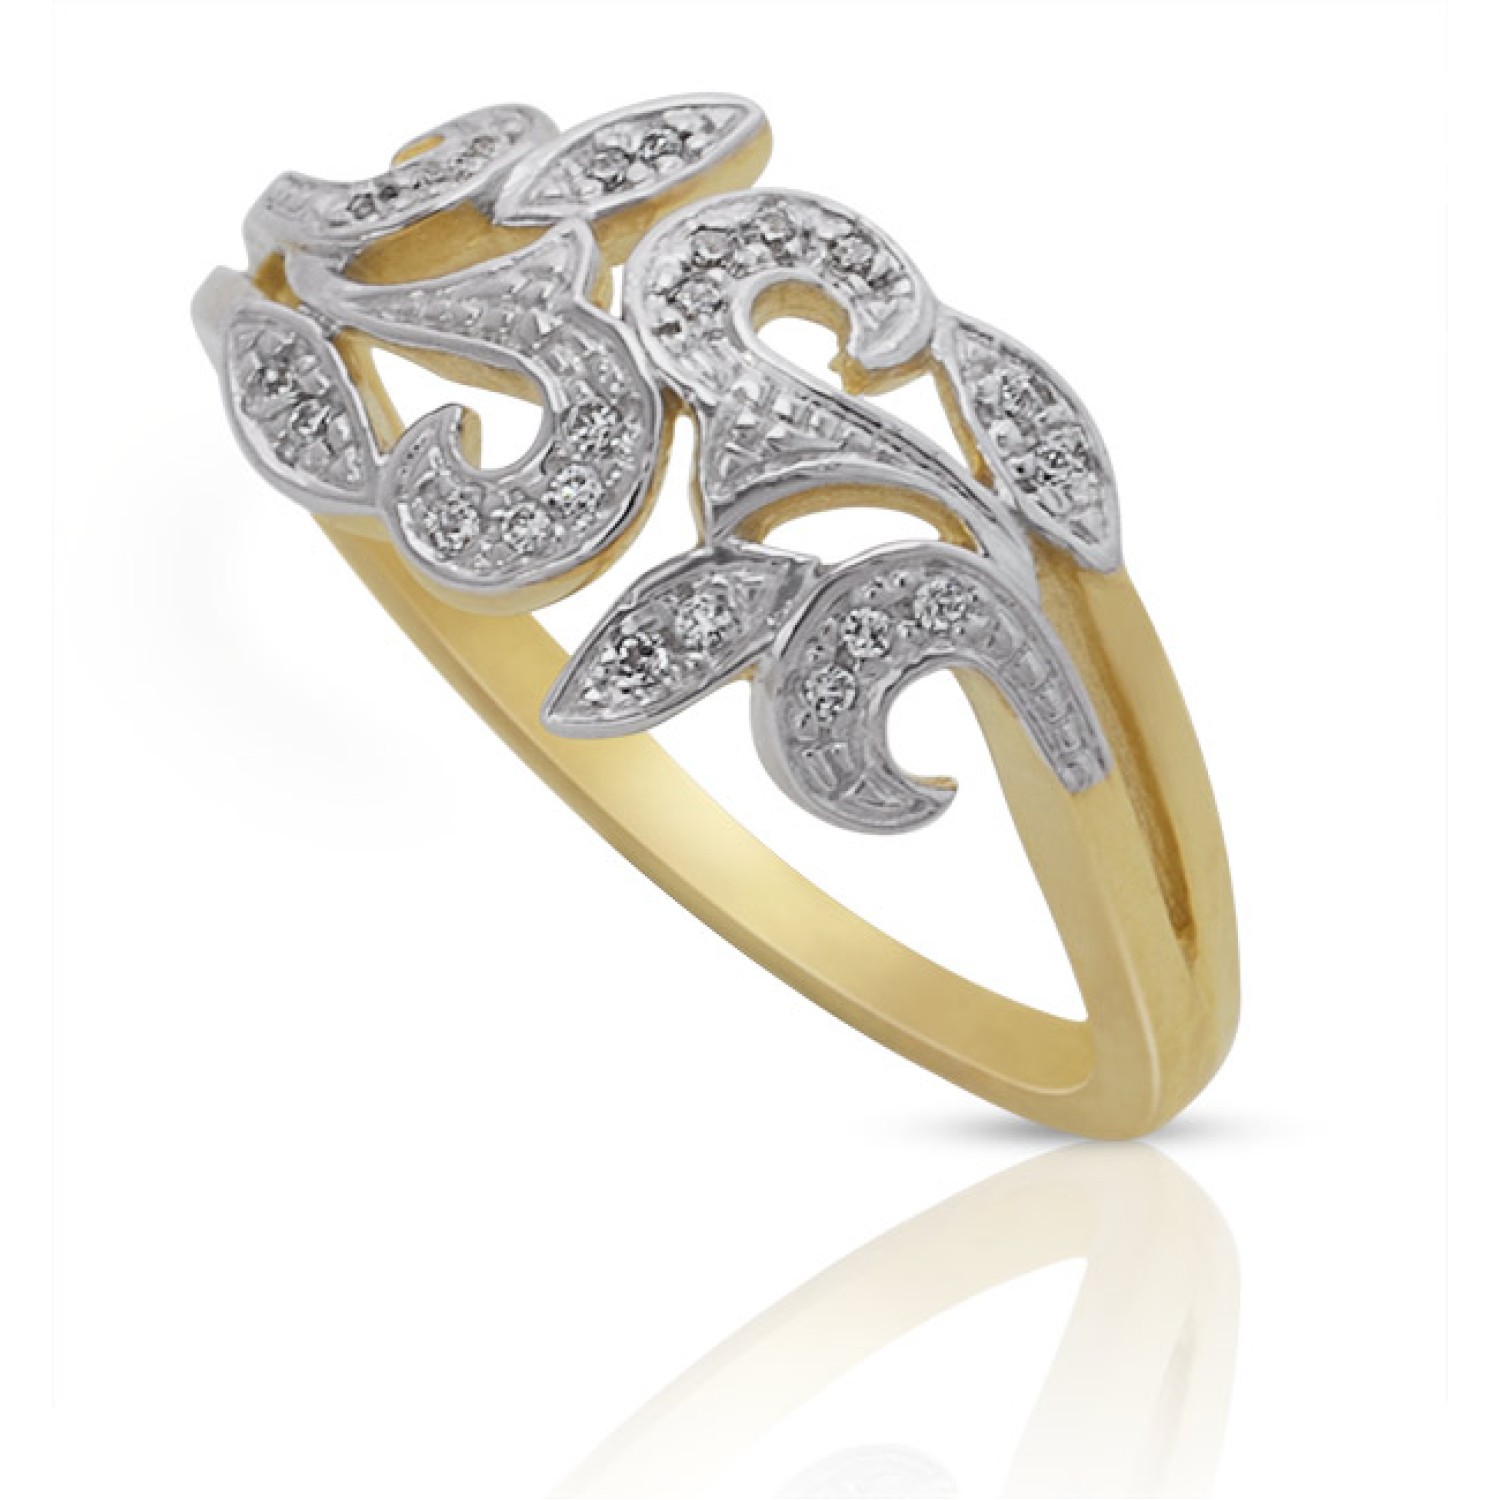 9ct Gold Cubic Zirconia Ring. A delightful 9ct Ring set with Cubic Zirconia . 9ct Gold Set with Cubic Zirconia Stock Size Q Available in store at Christies Hunters Plaza Papatoetoe or online Christies exclusive 5 year guarantee 3 Months No Paym @christies